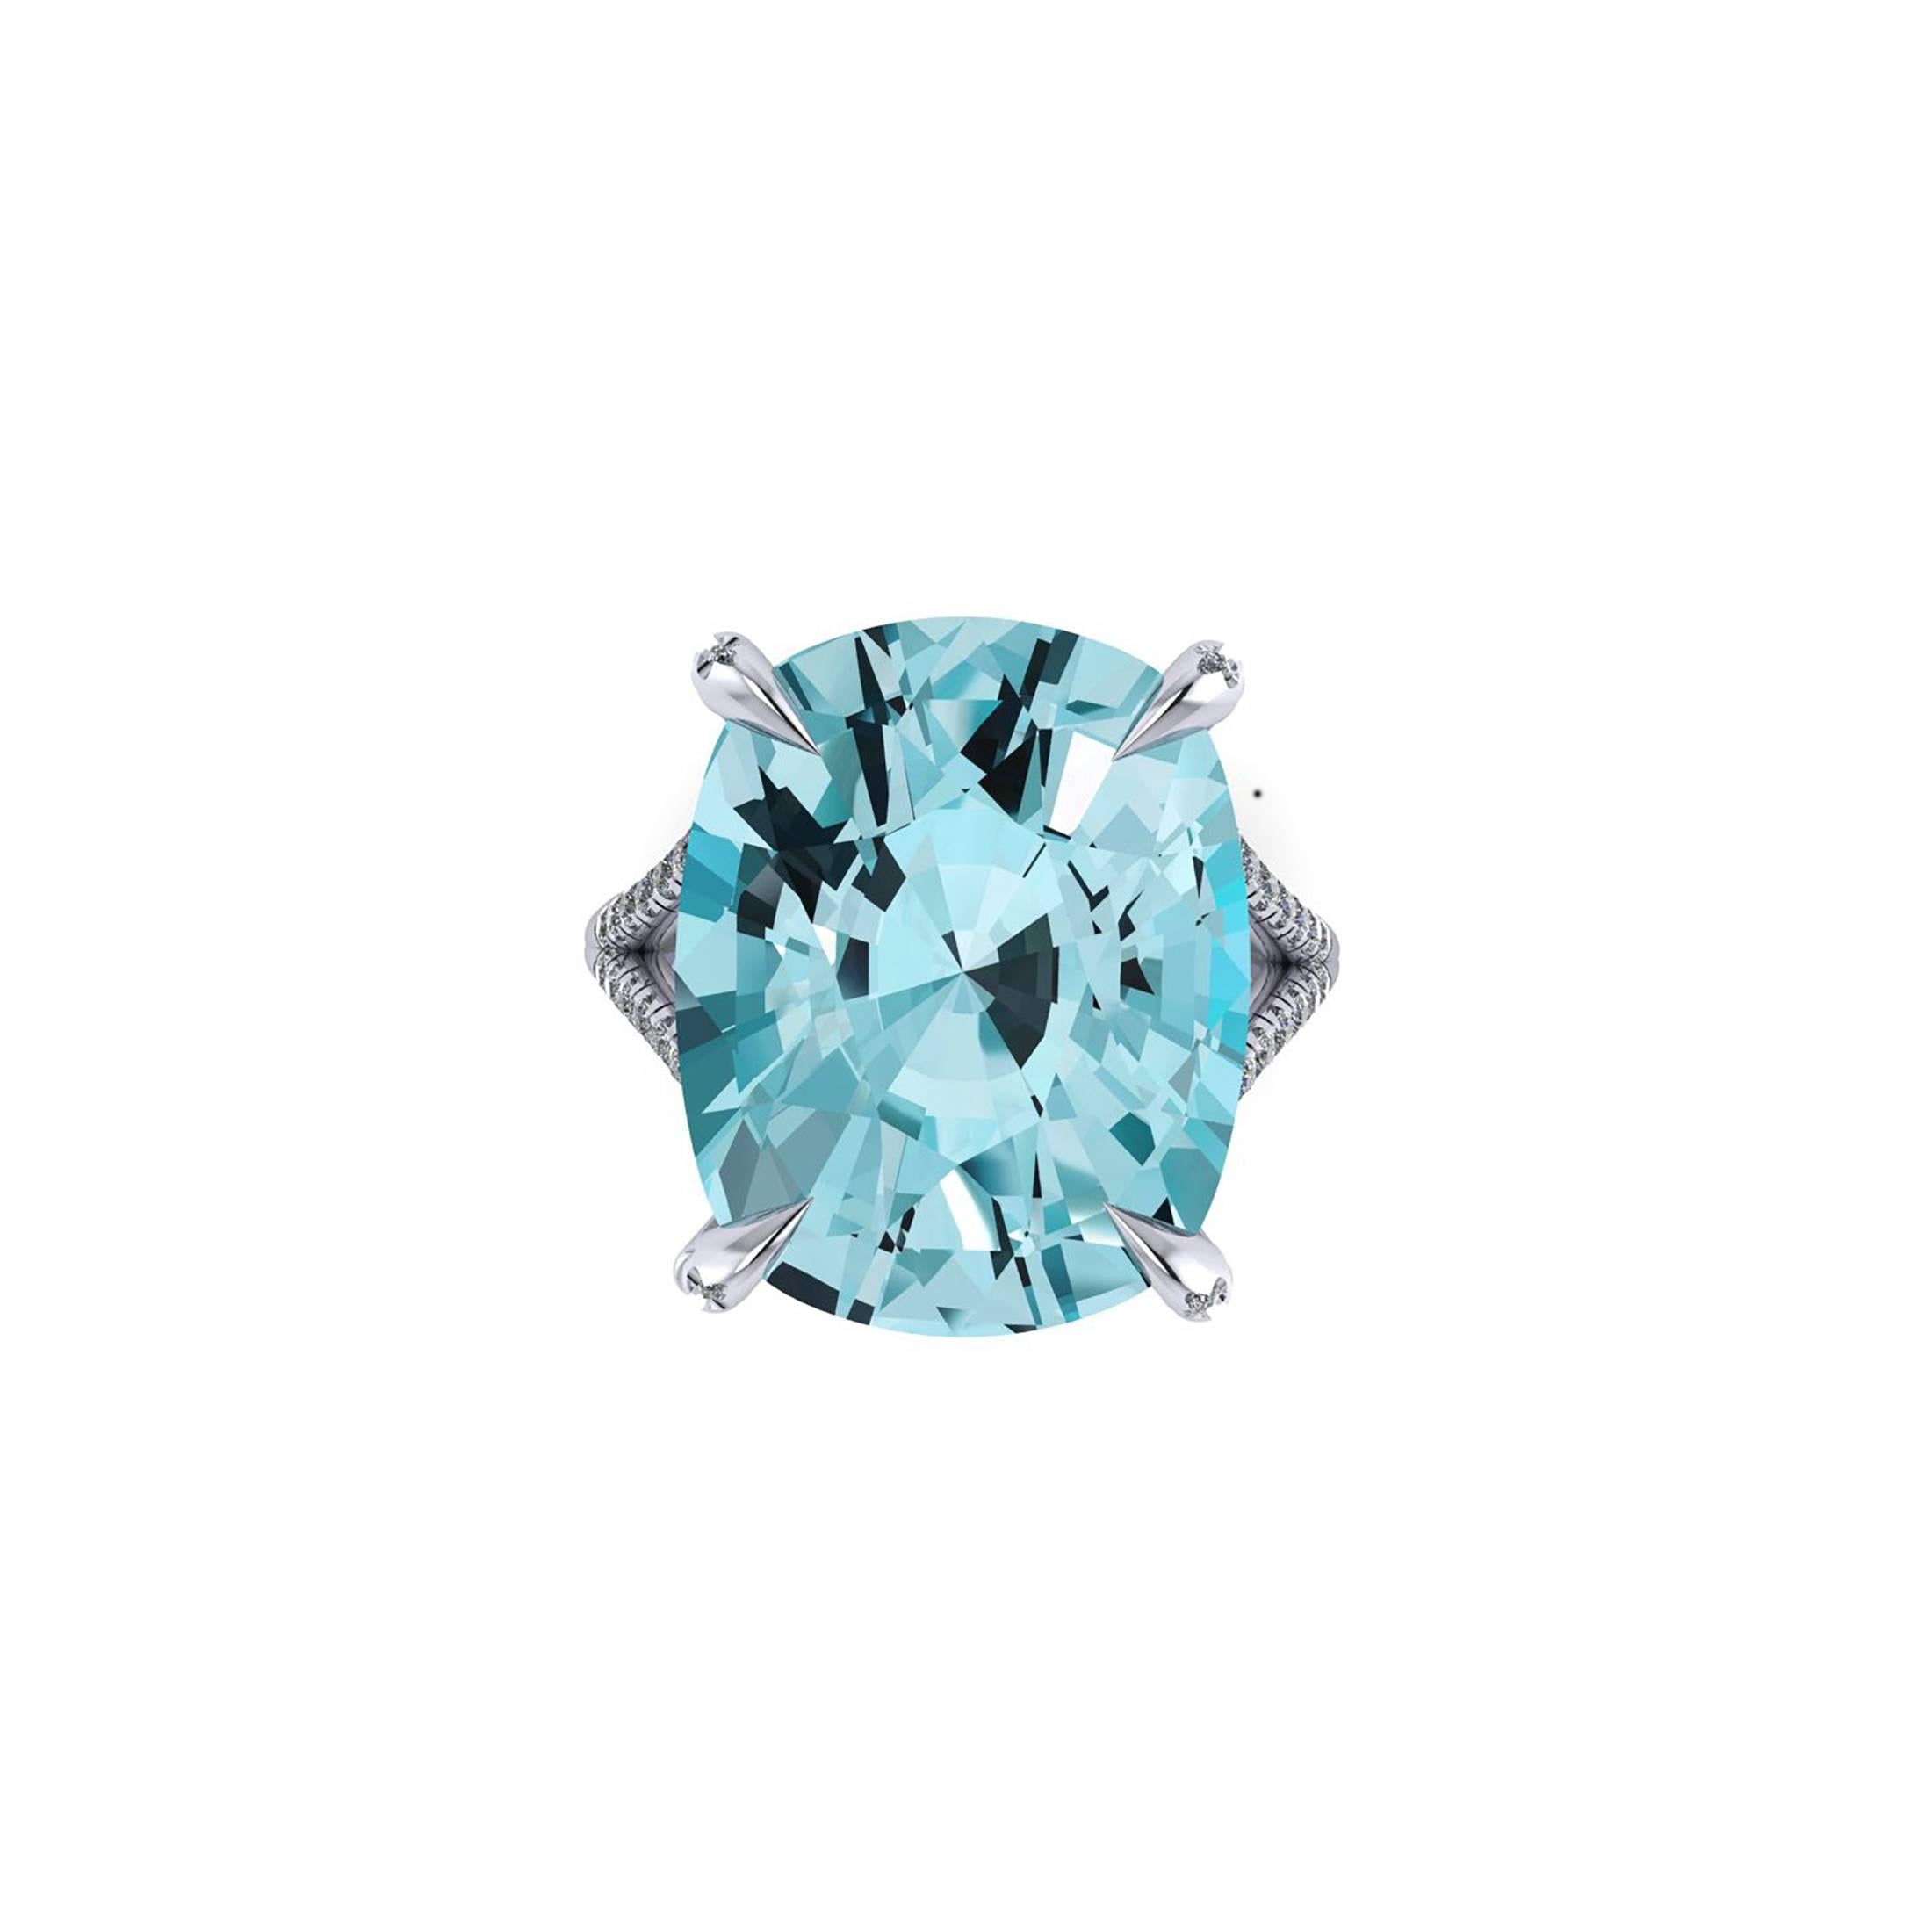 Ferrucci an approximate stunning 16 carats Aquamarine, set in a uniquely designed 18k white gold ring by master jeweler Francesco Ferrucci, with white bright diamonds of 0.50 carats to enlight a splendid blue mineral.
Entirely made in New York City,